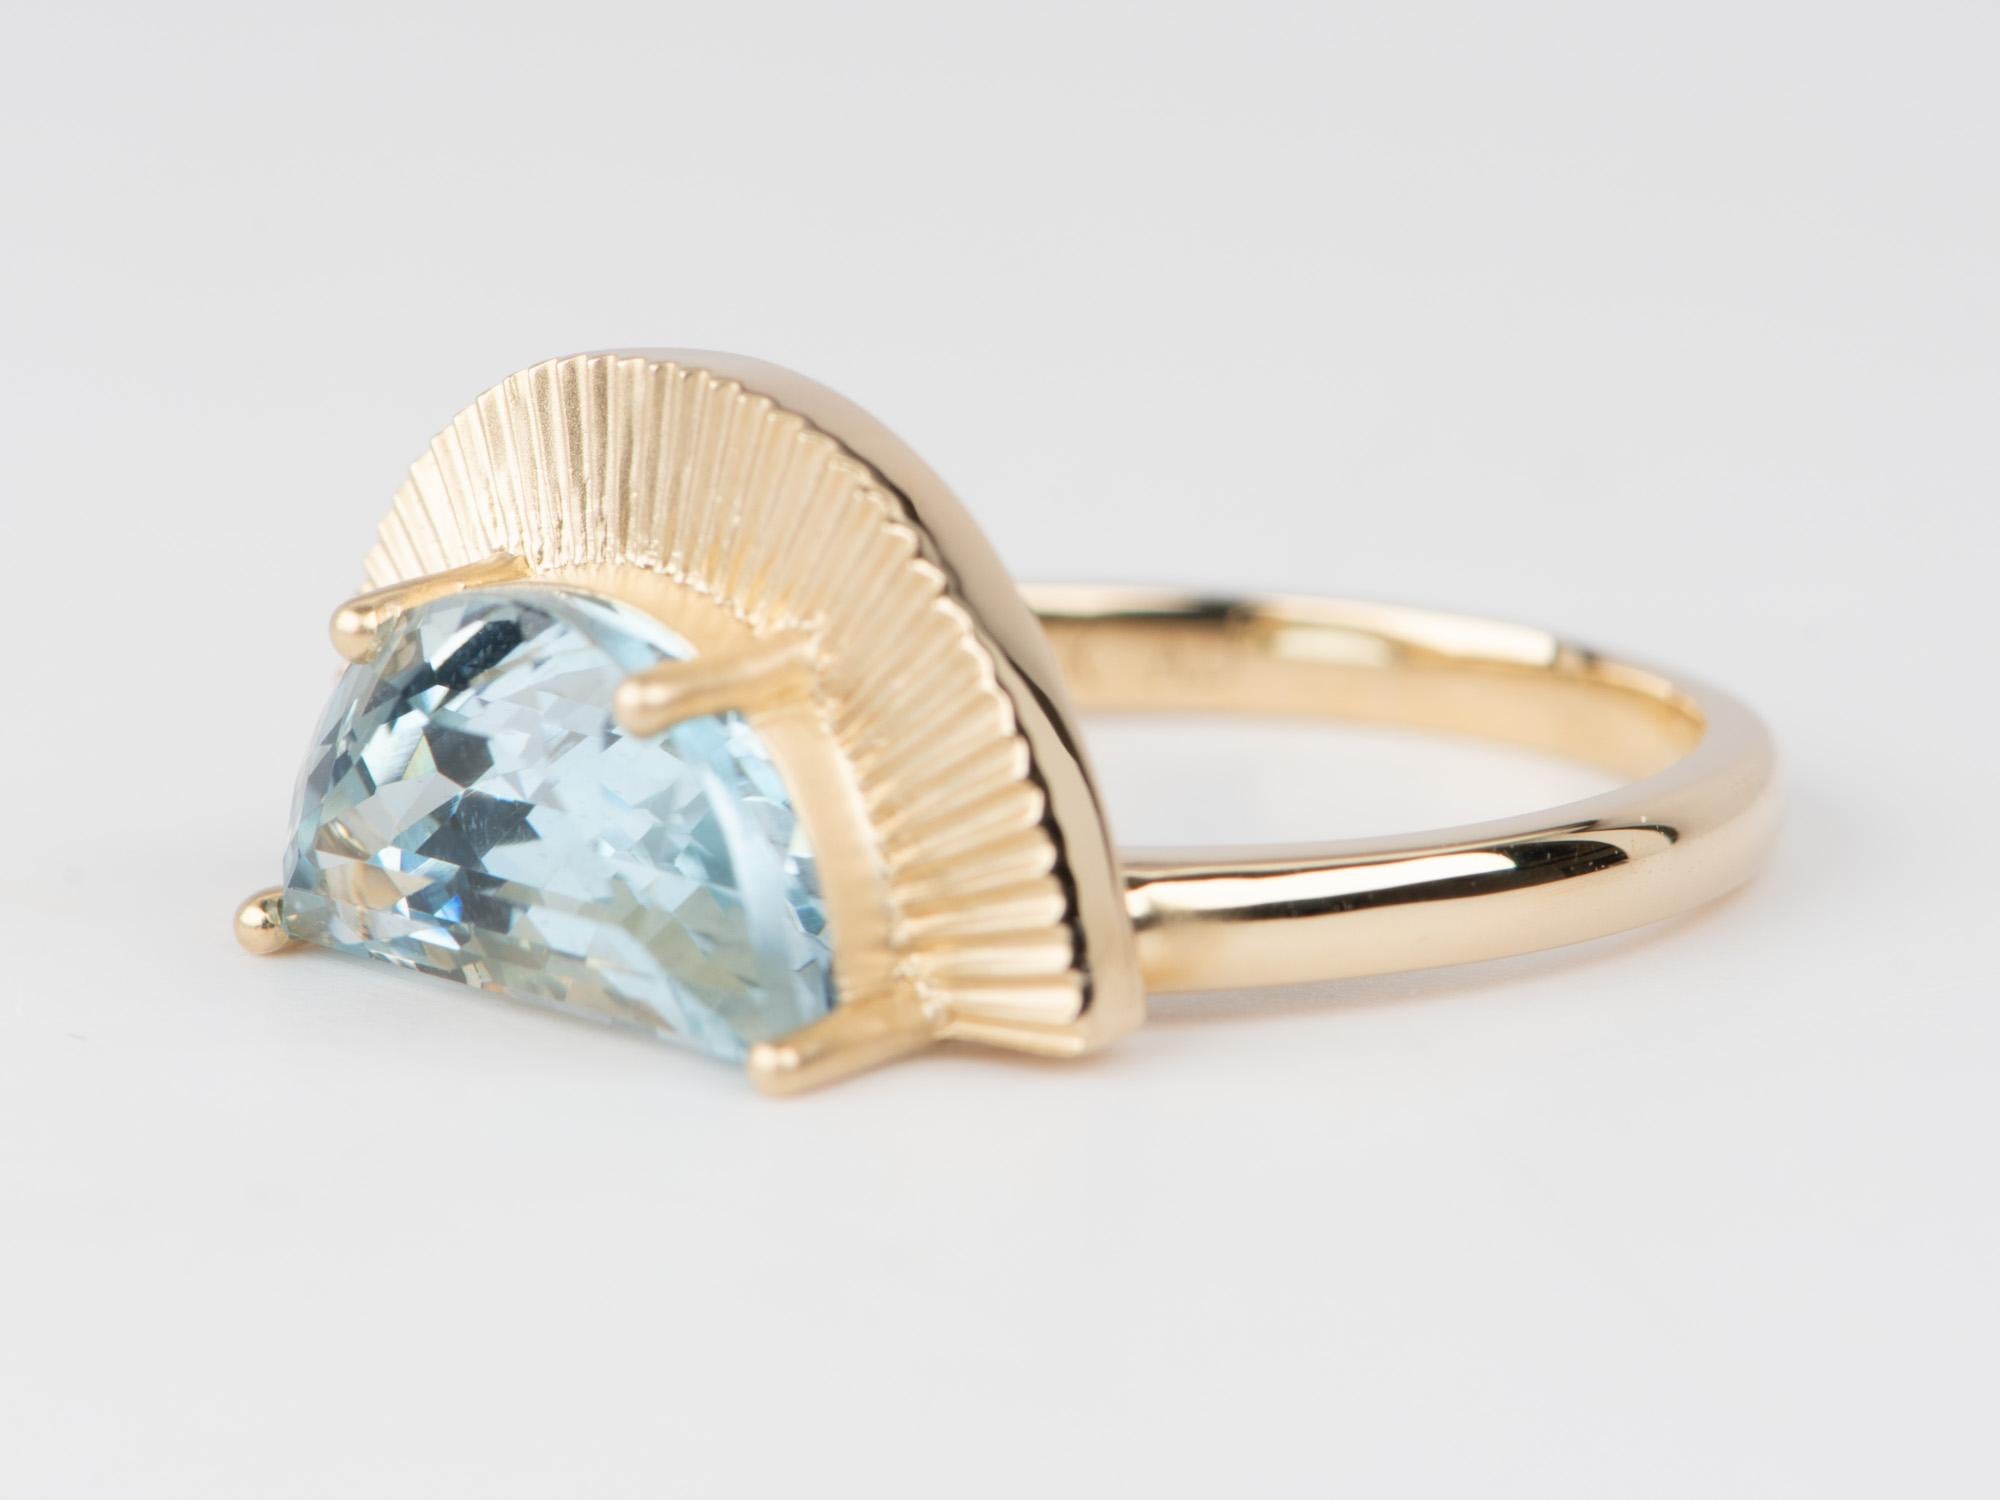 2.9ct Half Moon Shape Aquamarine with Sun Ray Ring 14K Gold R6669 In New Condition For Sale In Osprey, FL